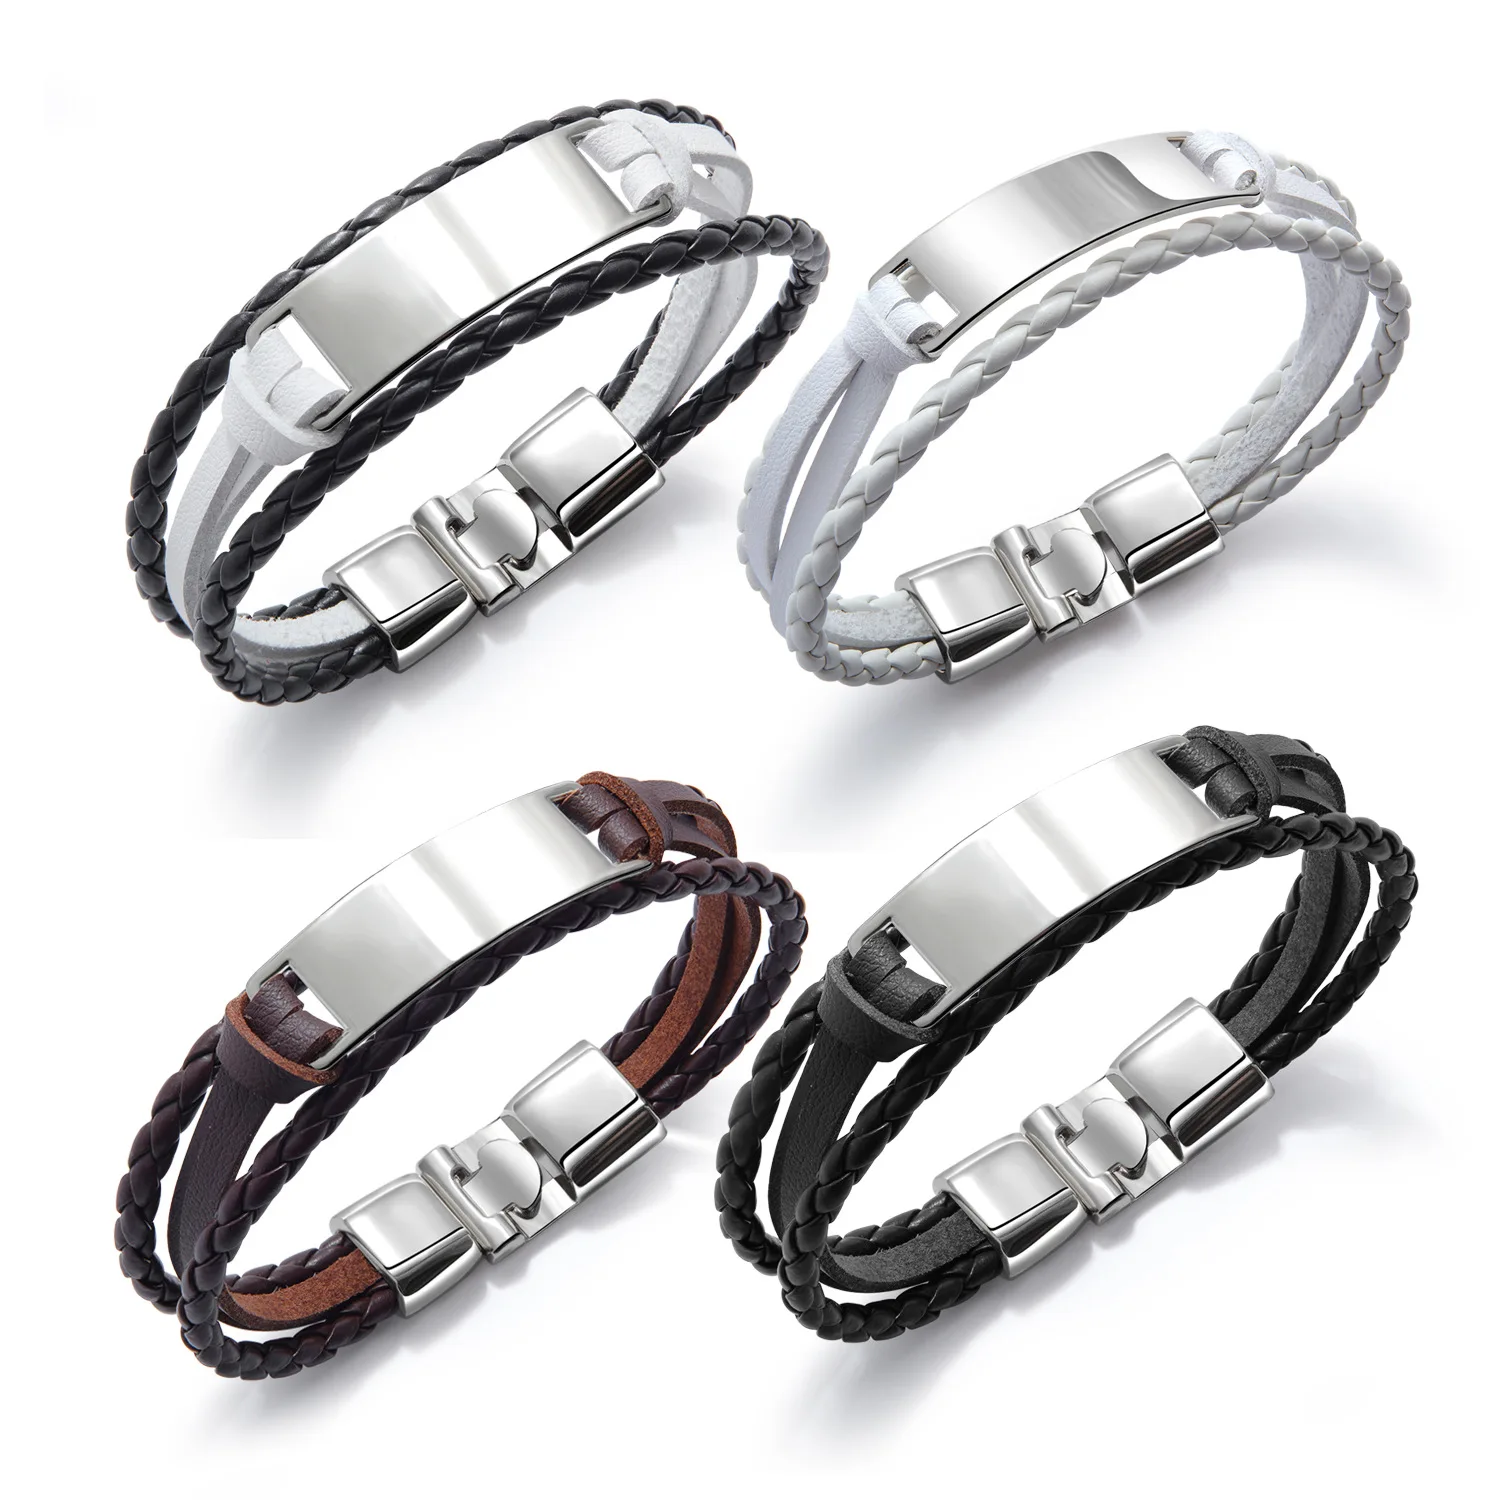 

Multi Layer Woven Men Leather Bangles Simple Versatile Casual Retro Bracelet Hiphop Rock Gift Jewelry Bracelets Stainless Steels